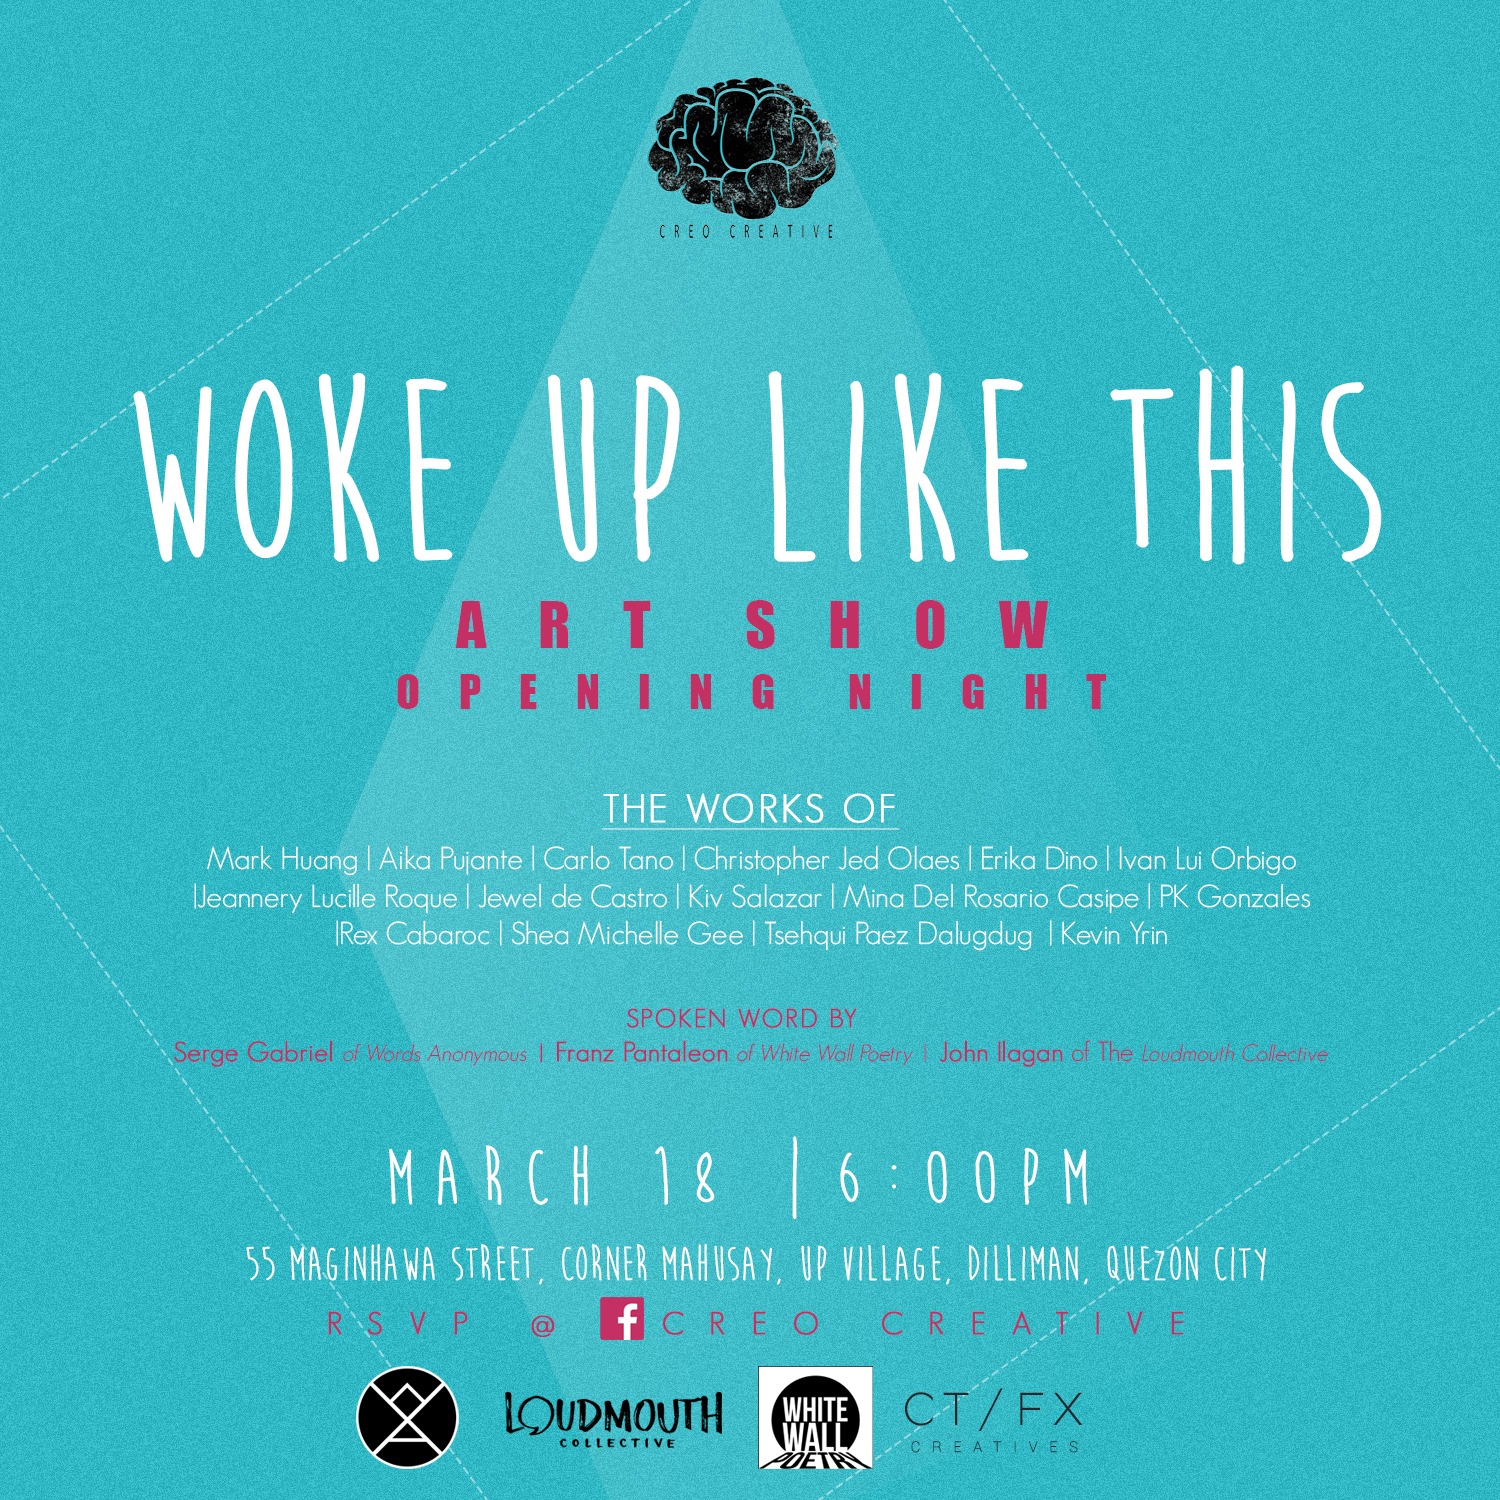 Woke Up Like This Friday, March 18 at 6 PM Next Week 55 Maginhawa street, corner mahusay, up village, dilliman, quezon city "We woke up and this Is already happening, We woke up to this. We woke up and this Is already happening, We woke up like this..." ----- CT/FX Creatives Like This Page · 10 hrs · We are inviting everyone to attend CREO Creative's art exhibit, Woke Up Like This this March 18 at 55 Maginhawa St, corner Mahusay St., UP Village, Diliman, Quezon City, 6pm. See the works of: Mark Huang | Aika Pujante | Carlo Tano | Christopher Jed Olaes | Erika Dino | Ivan Lui Orbigo | Jeannery Lucille Roque | Jewel de Castro | Kiv Salazar | Mina Del Rosario Casipe | PK Gonzales | Rex Cabaroc | Shea Michelle Gee | Tsehqui Paez Dalugdug | Kevin Yrin Also, spoken word performances by Serge Gabriel of Words Anonymous, Franz Pantaleon of White Wall Poetry, and John Ilagan of The Loudmouth Collective RSVP at CREO Creative Event Page: http://on.fb.me/1LWKElH